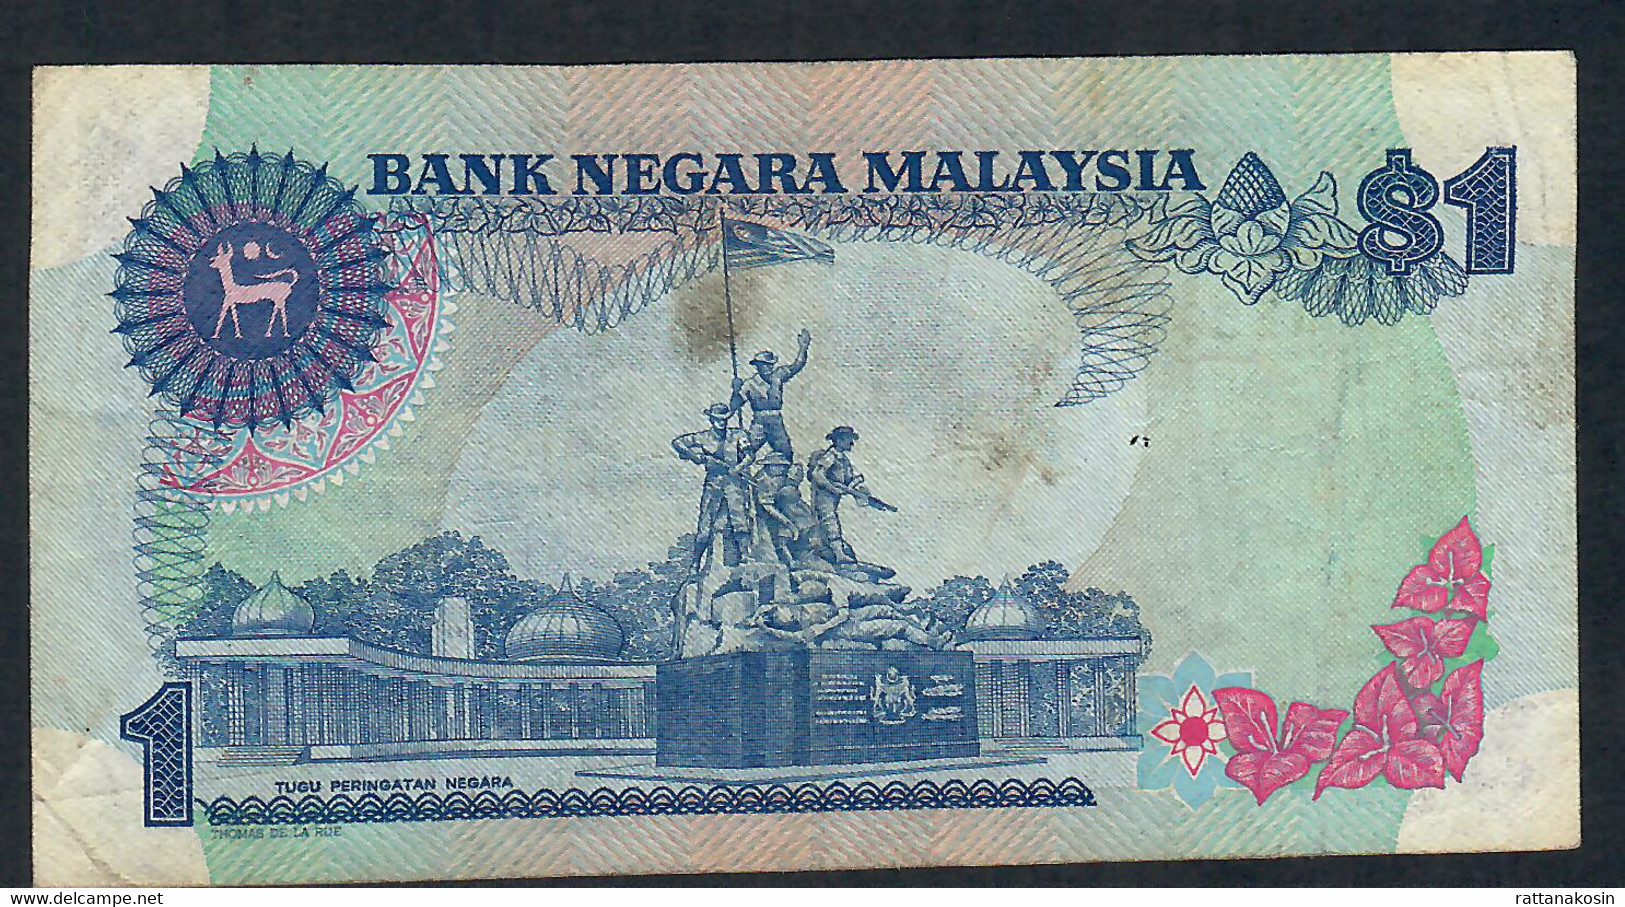 MALAYSIA  P19A 1 RINGGIT 1981 #AF  Printer TdlR RARE VARIETY  FINE++/Better  NO P.h.  ! ! - Malasia